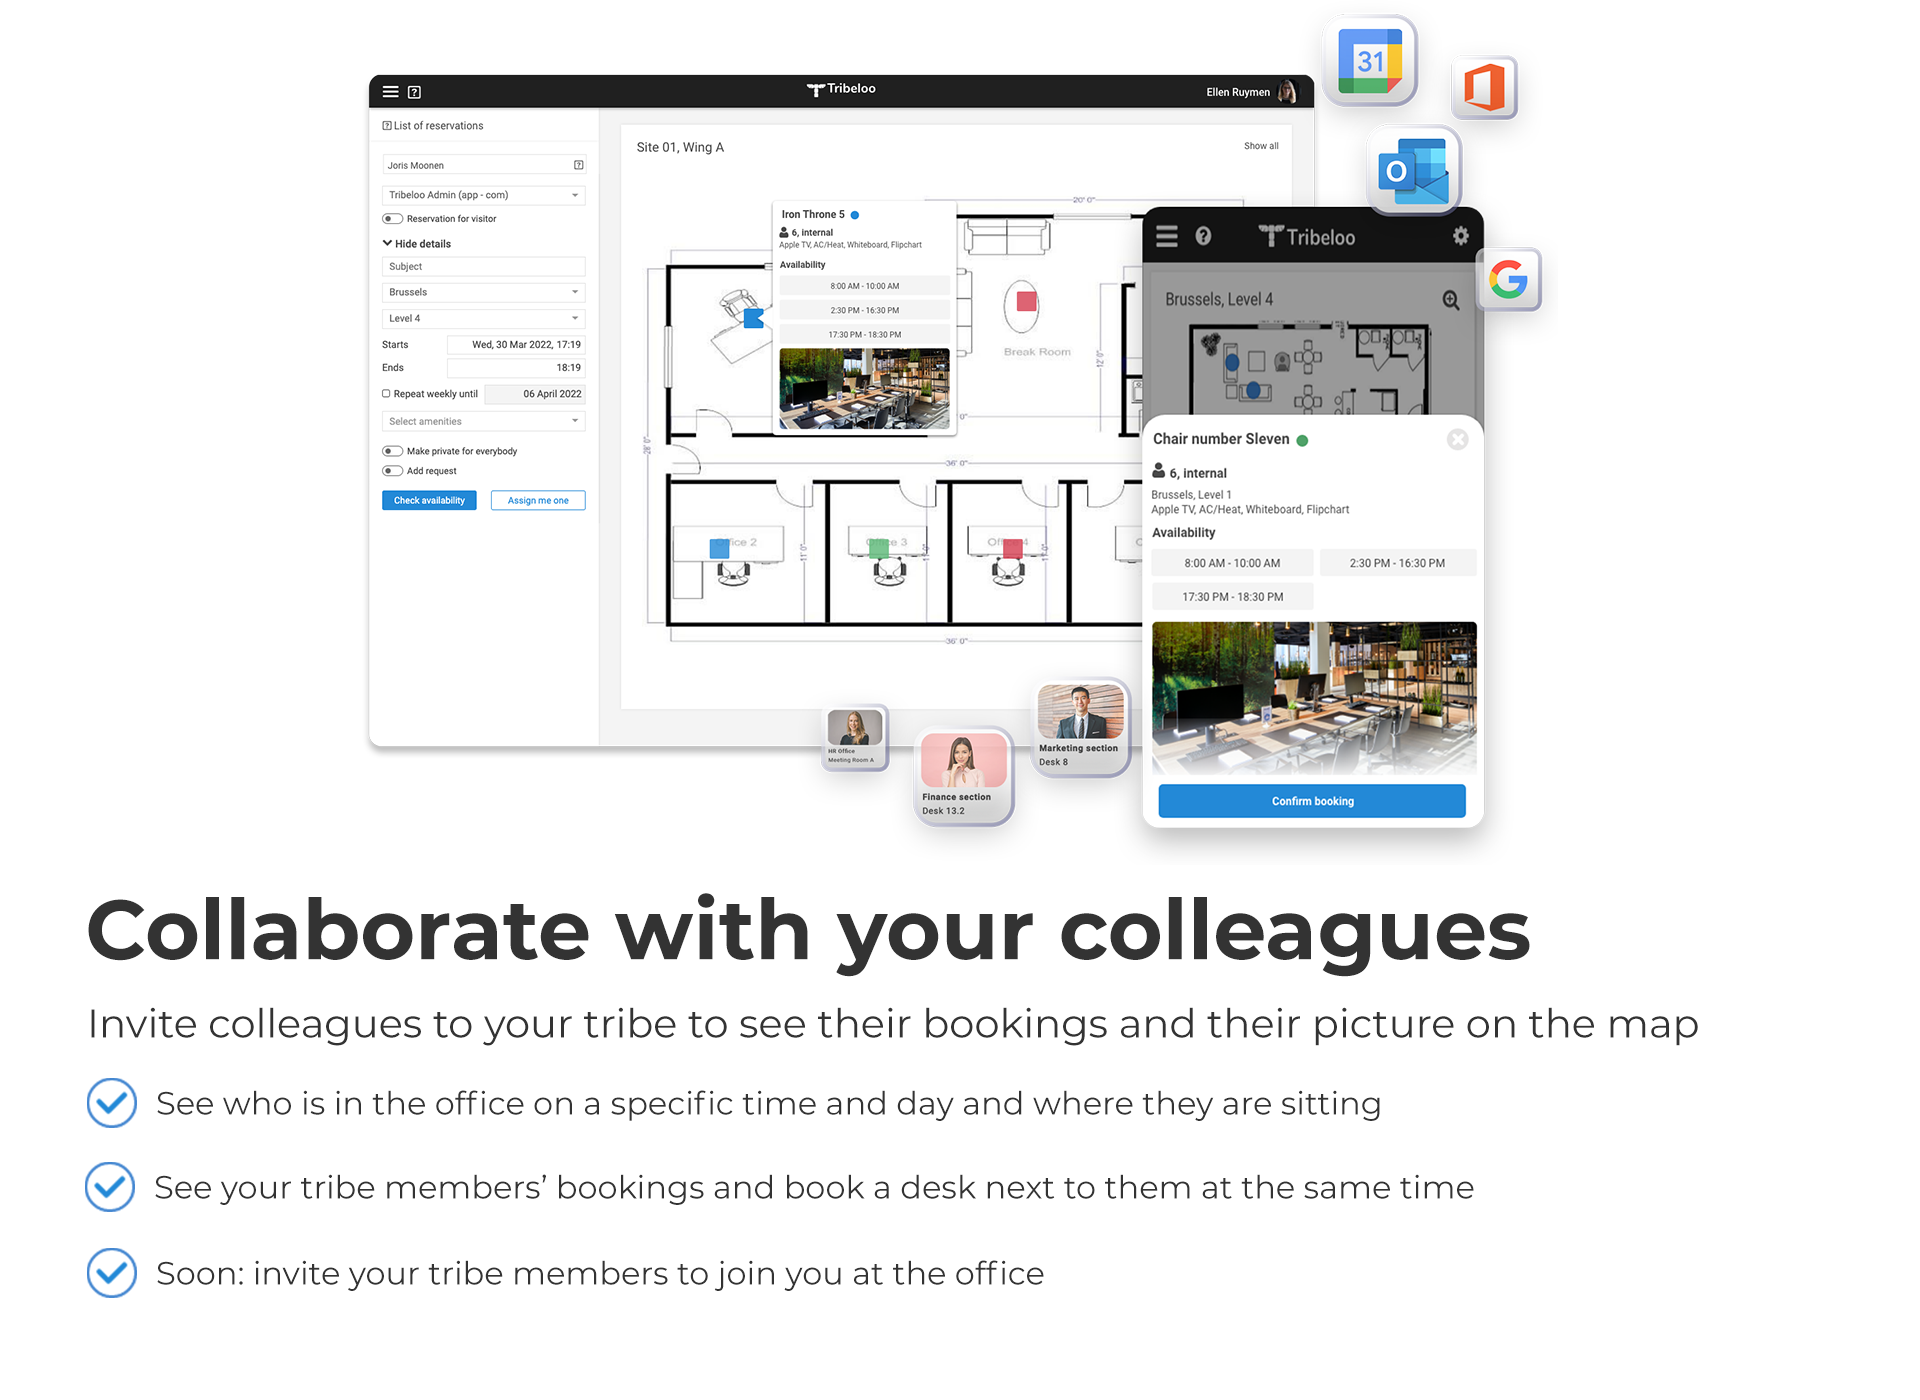 Tribeloo Software - Find and collaborate with colleagues